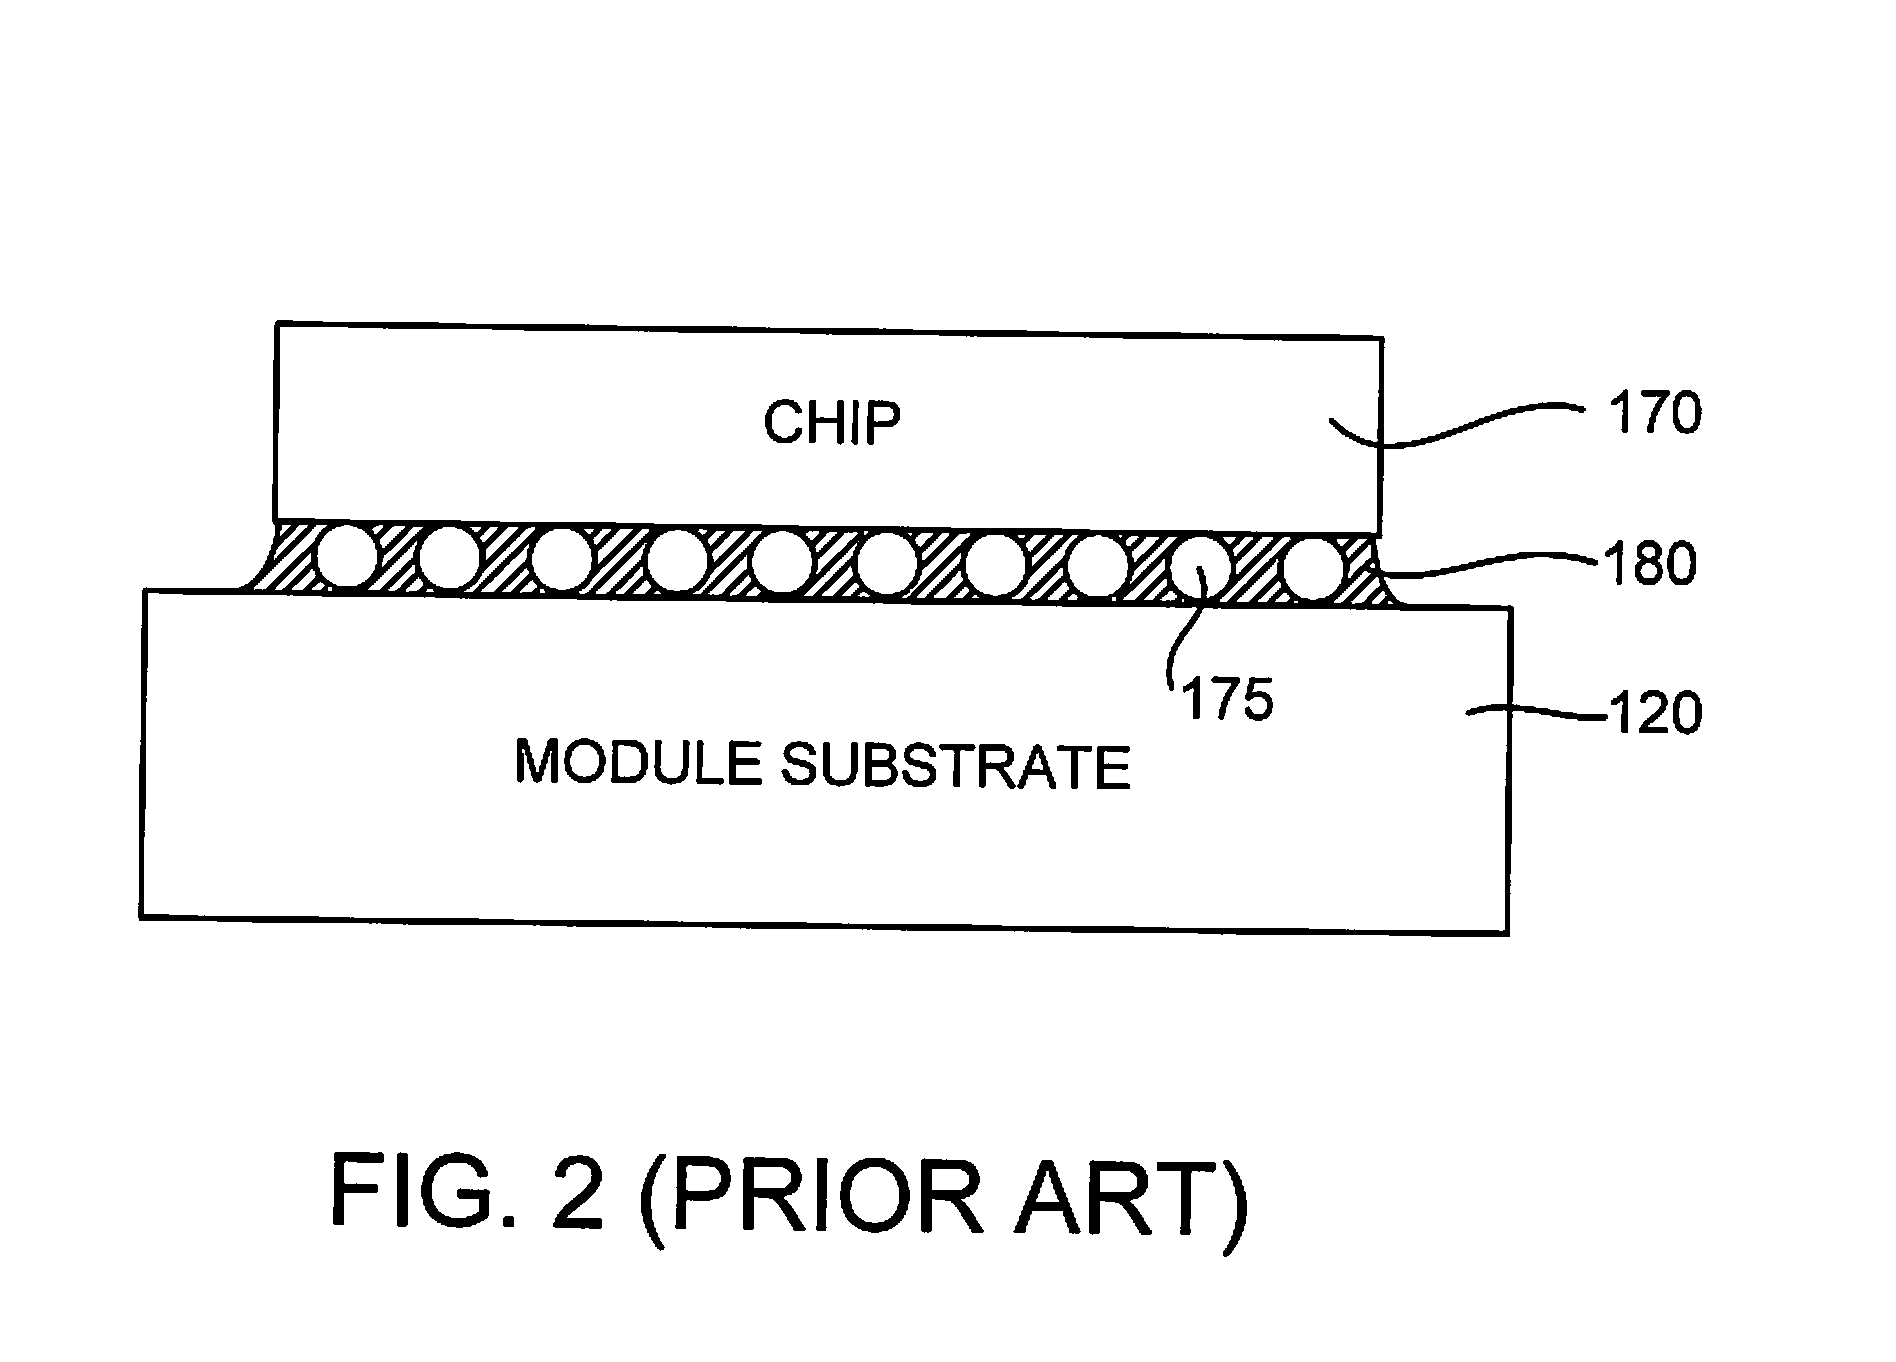 Method and Apparatus for Carbon Dioxide Gettering for a Chip Module Assembly